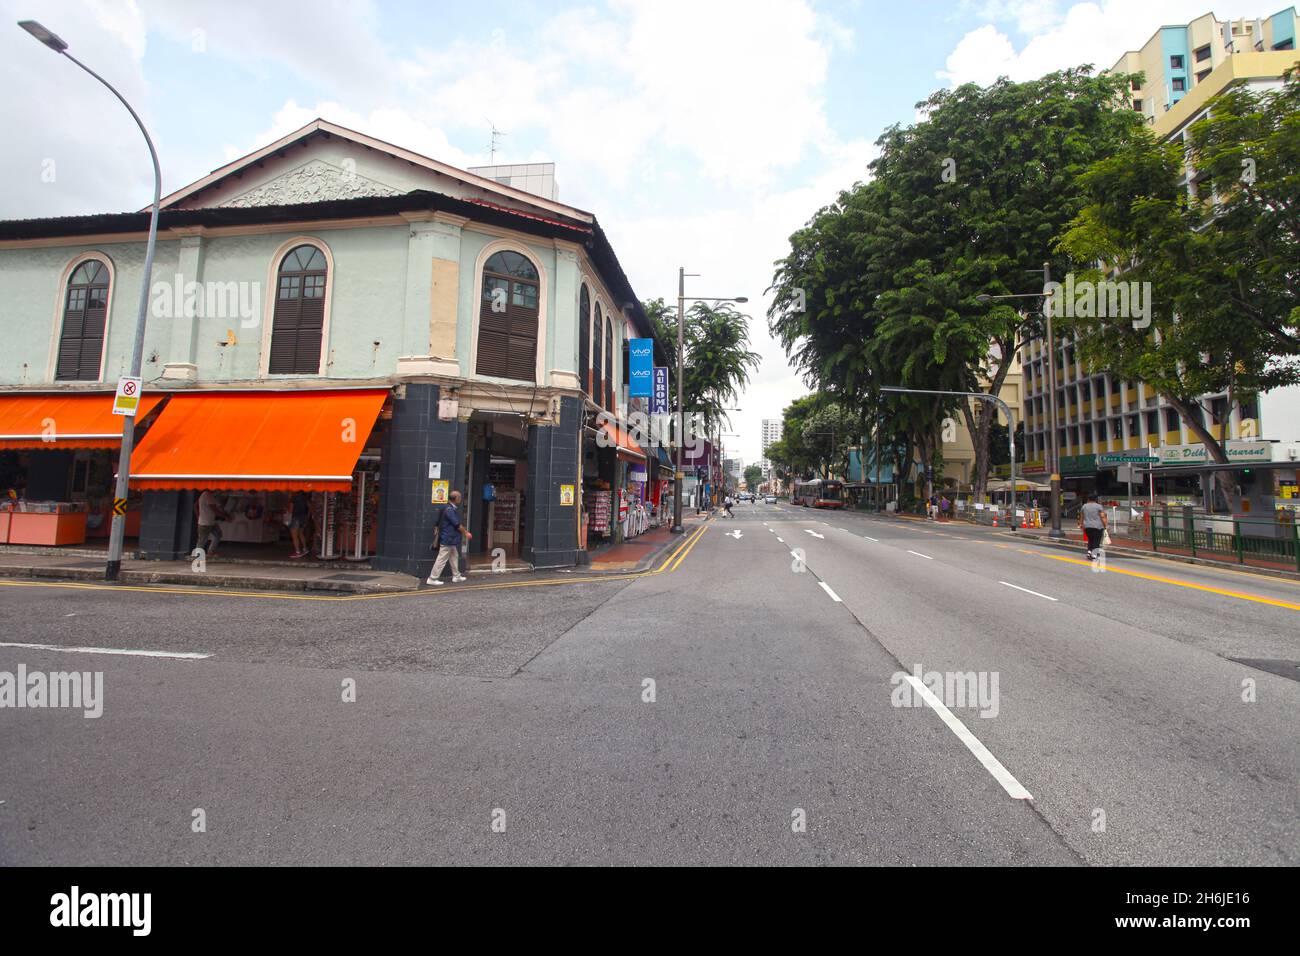 Old shophouses on the juncture of Serangoon Road and Rowell Road in Singapore's Little India district. Stock Photo